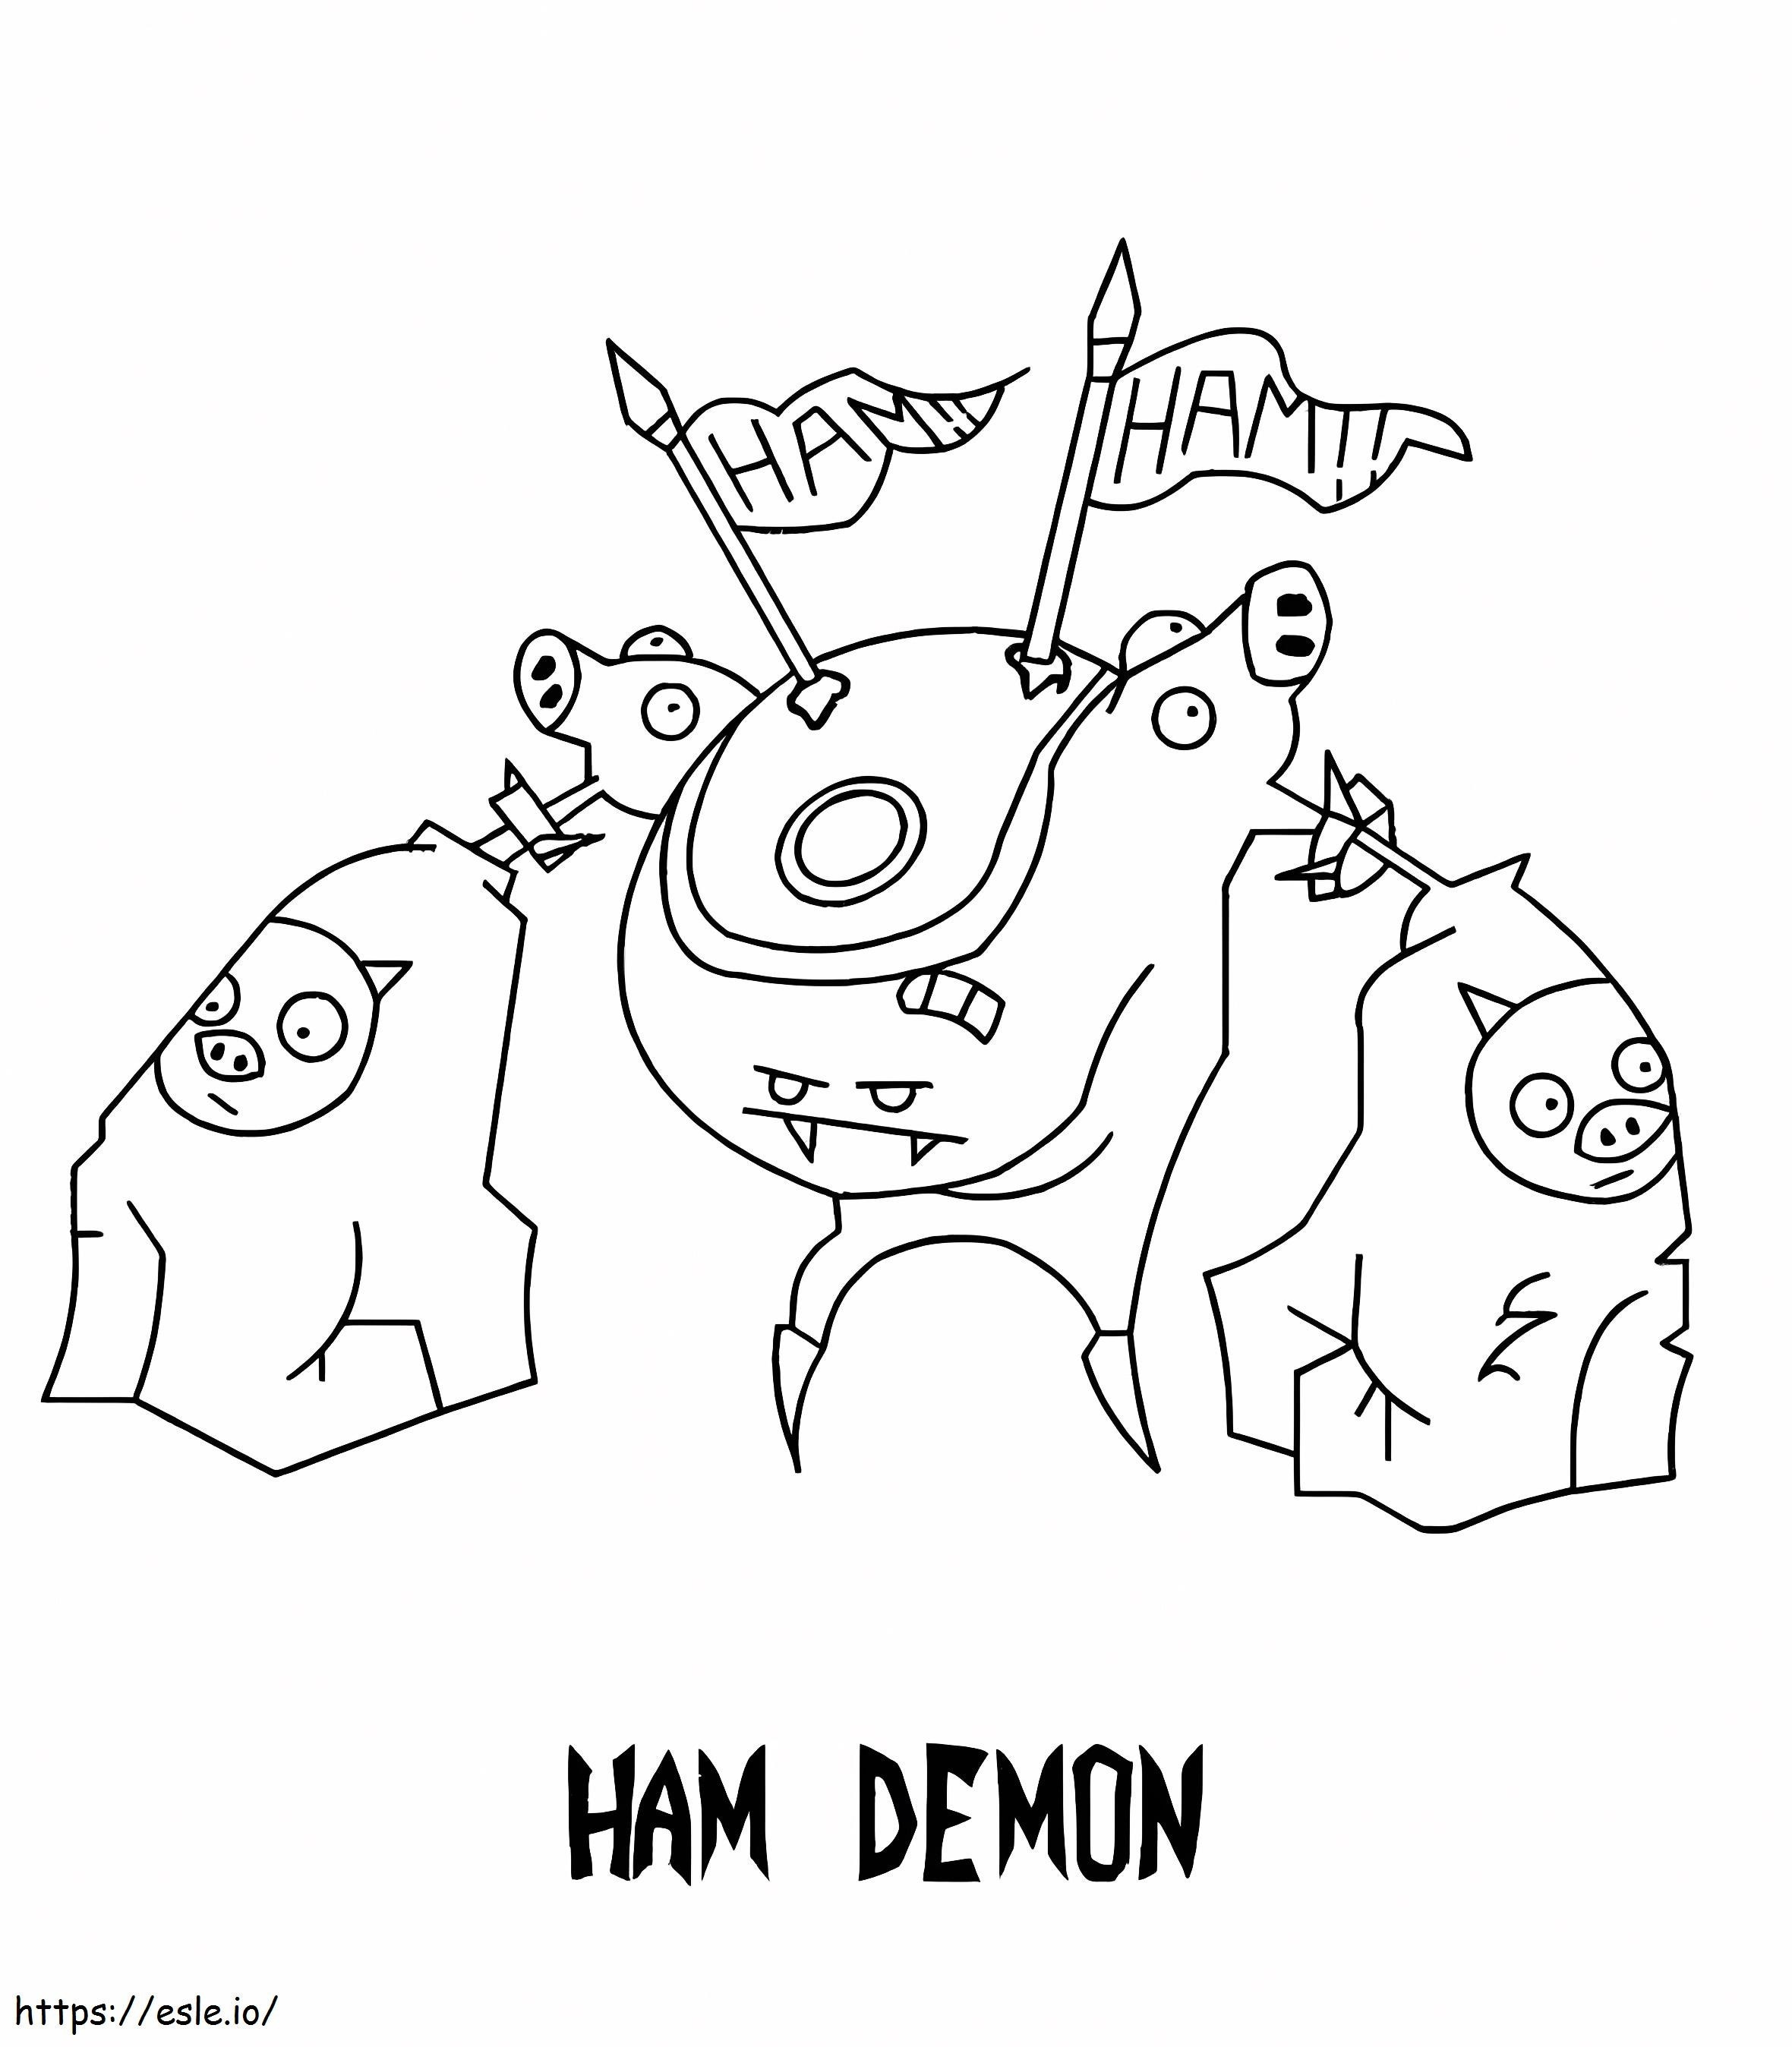 Ham Demon From Invader Zim coloring page